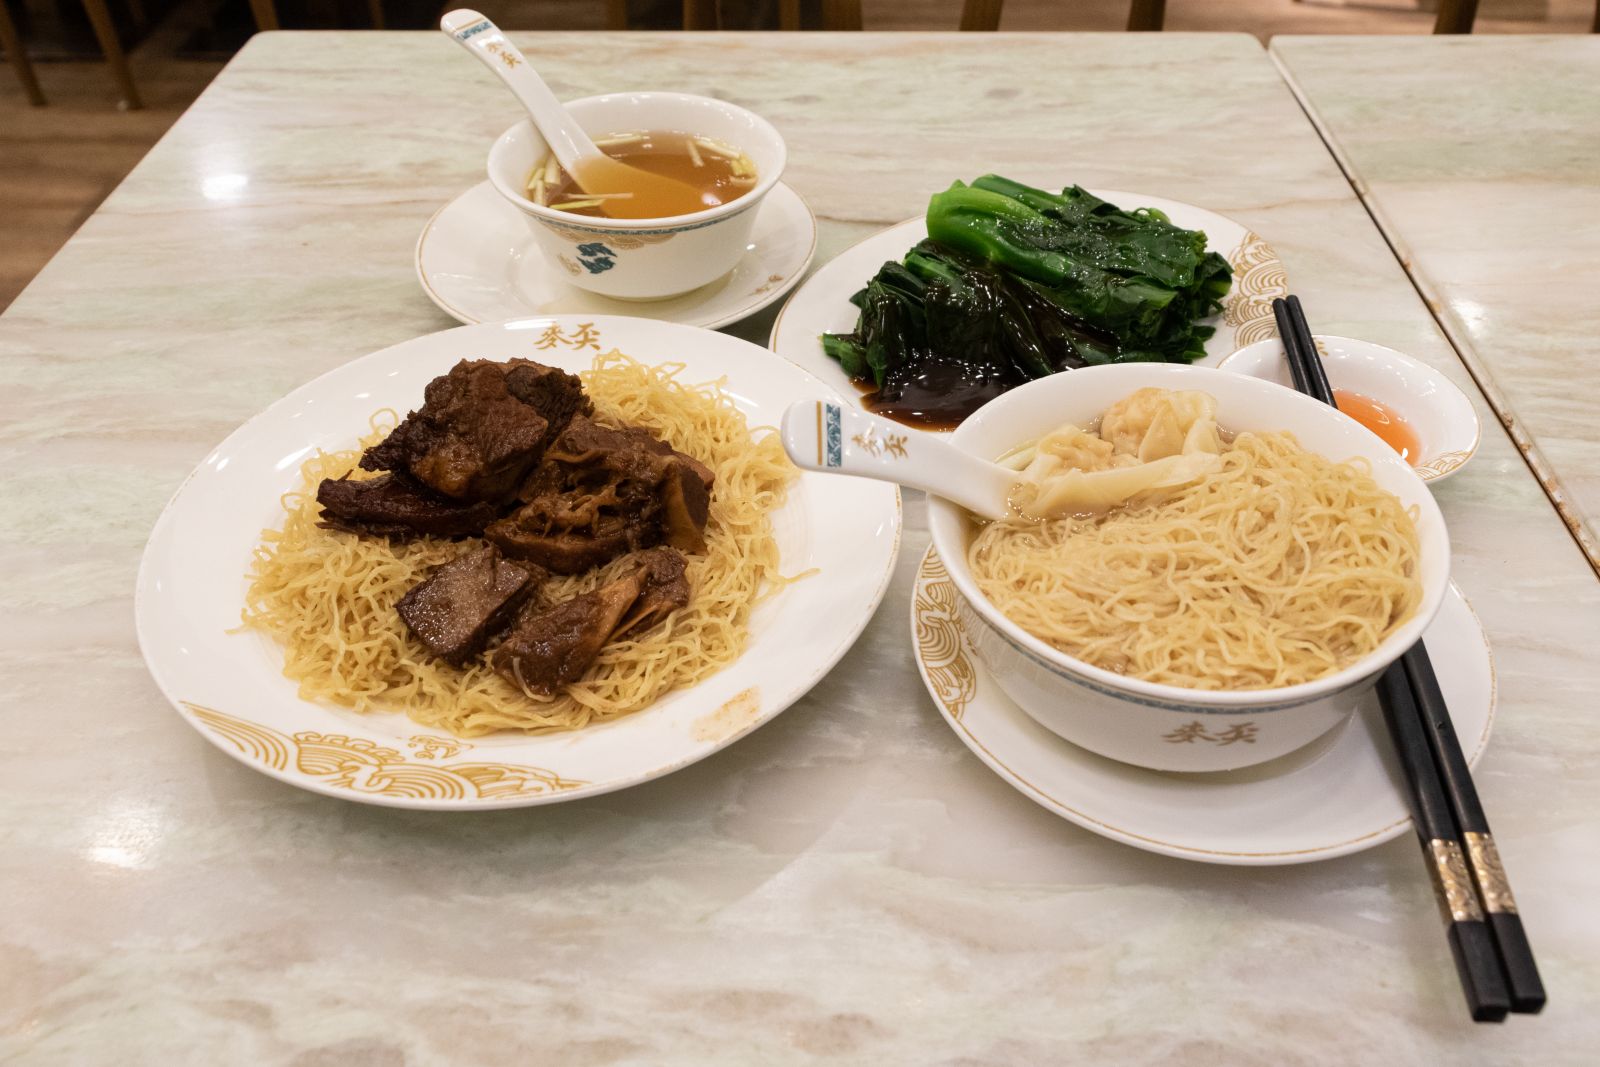 The two highlights of Mak's Noodles - Wonton Noodles (雲吞麵) and Tossed Noodles with Beef Brisket (牛腩撈麵)